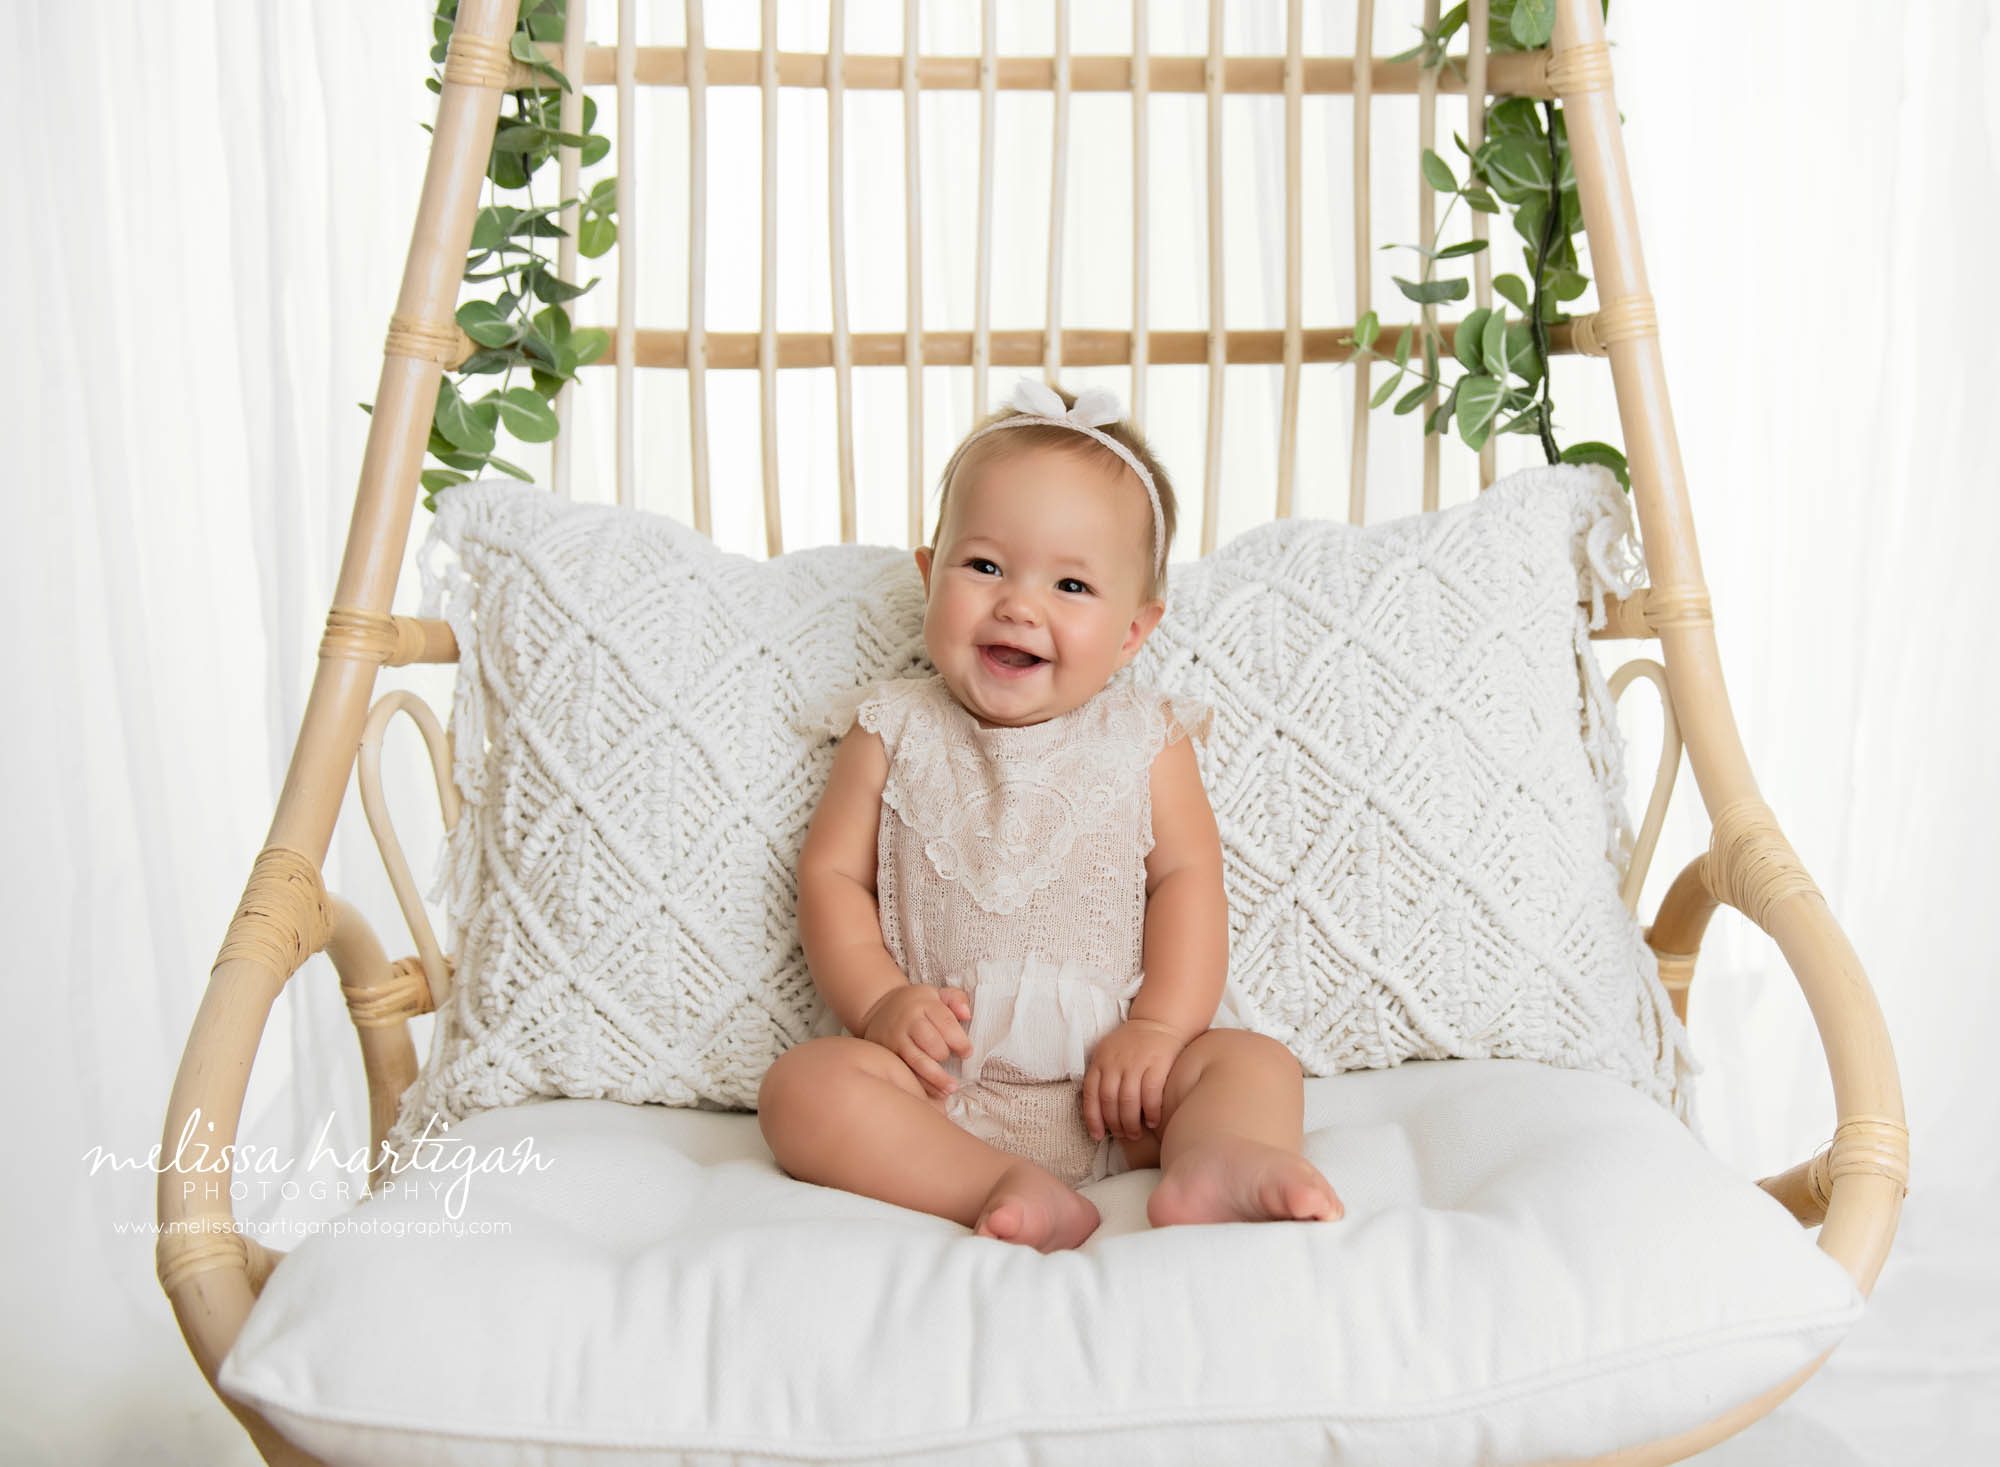 baby girl smiling laughing on chair